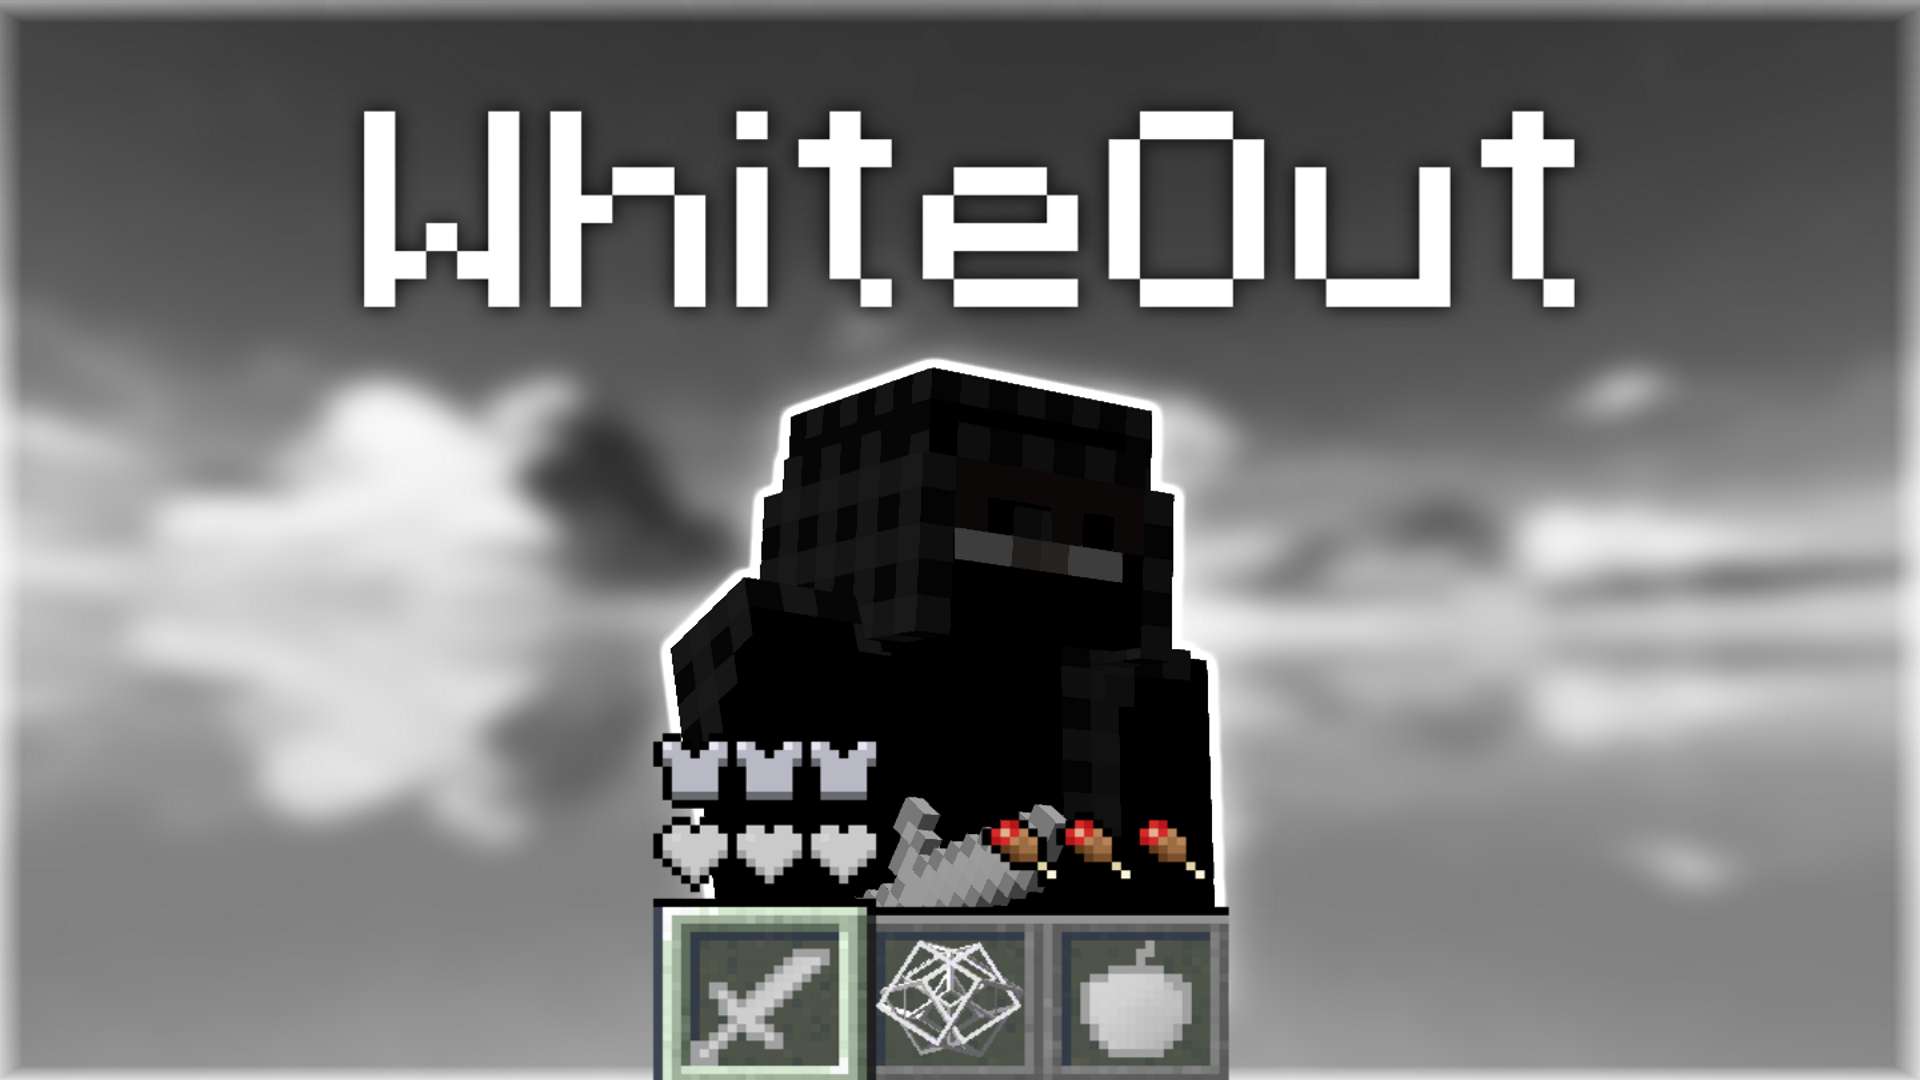 WhiteOut by Zocr 16x by Spxmder & Zocr on PvPRP